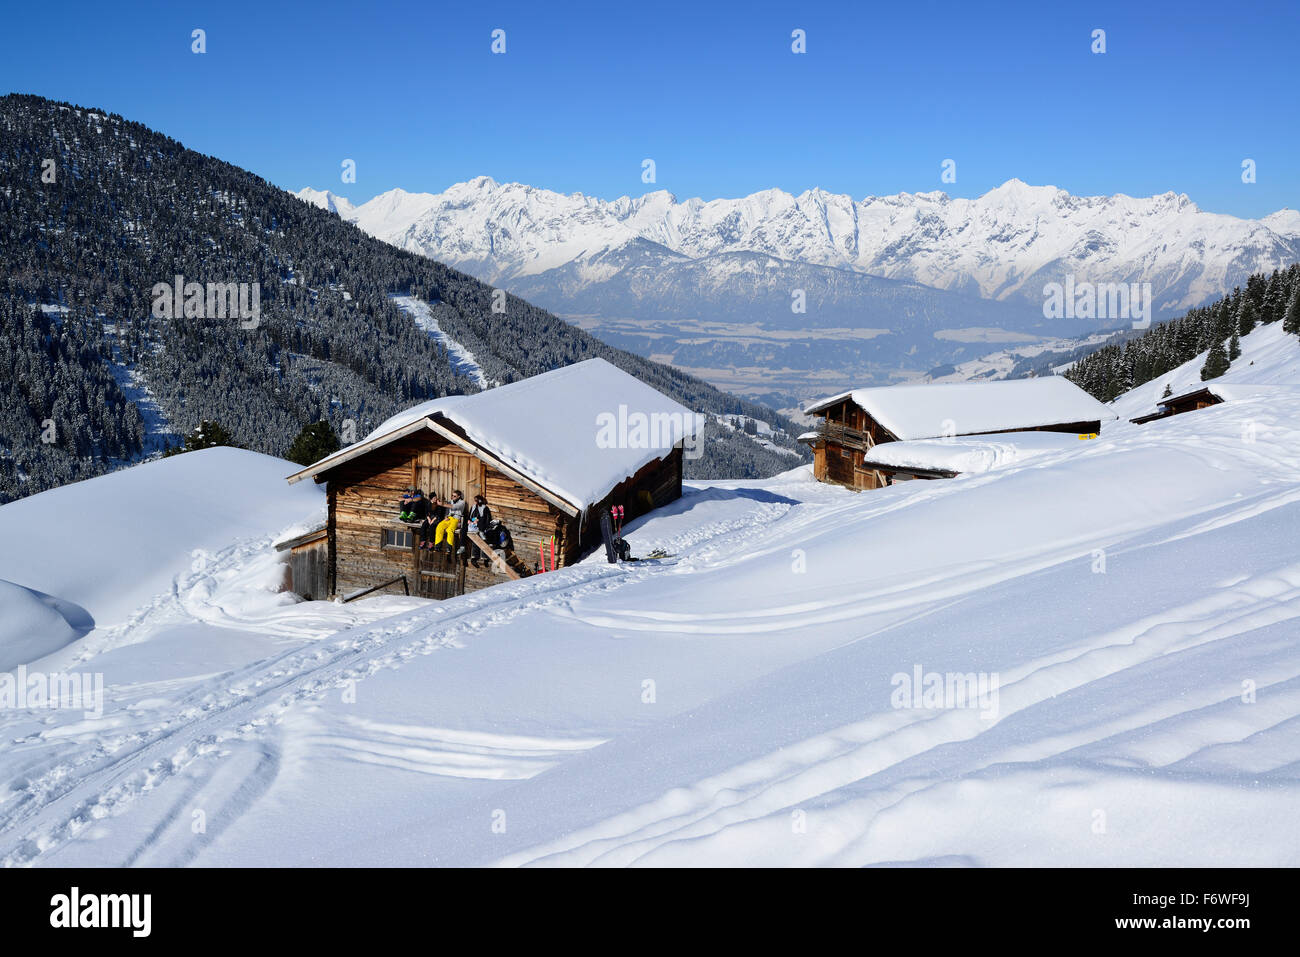 Group of people back-country skiing having a break at snow-covered alpine hut, back-country skiing, Hoher Kopf, Tux Alps, Tyrol, Stock Photo